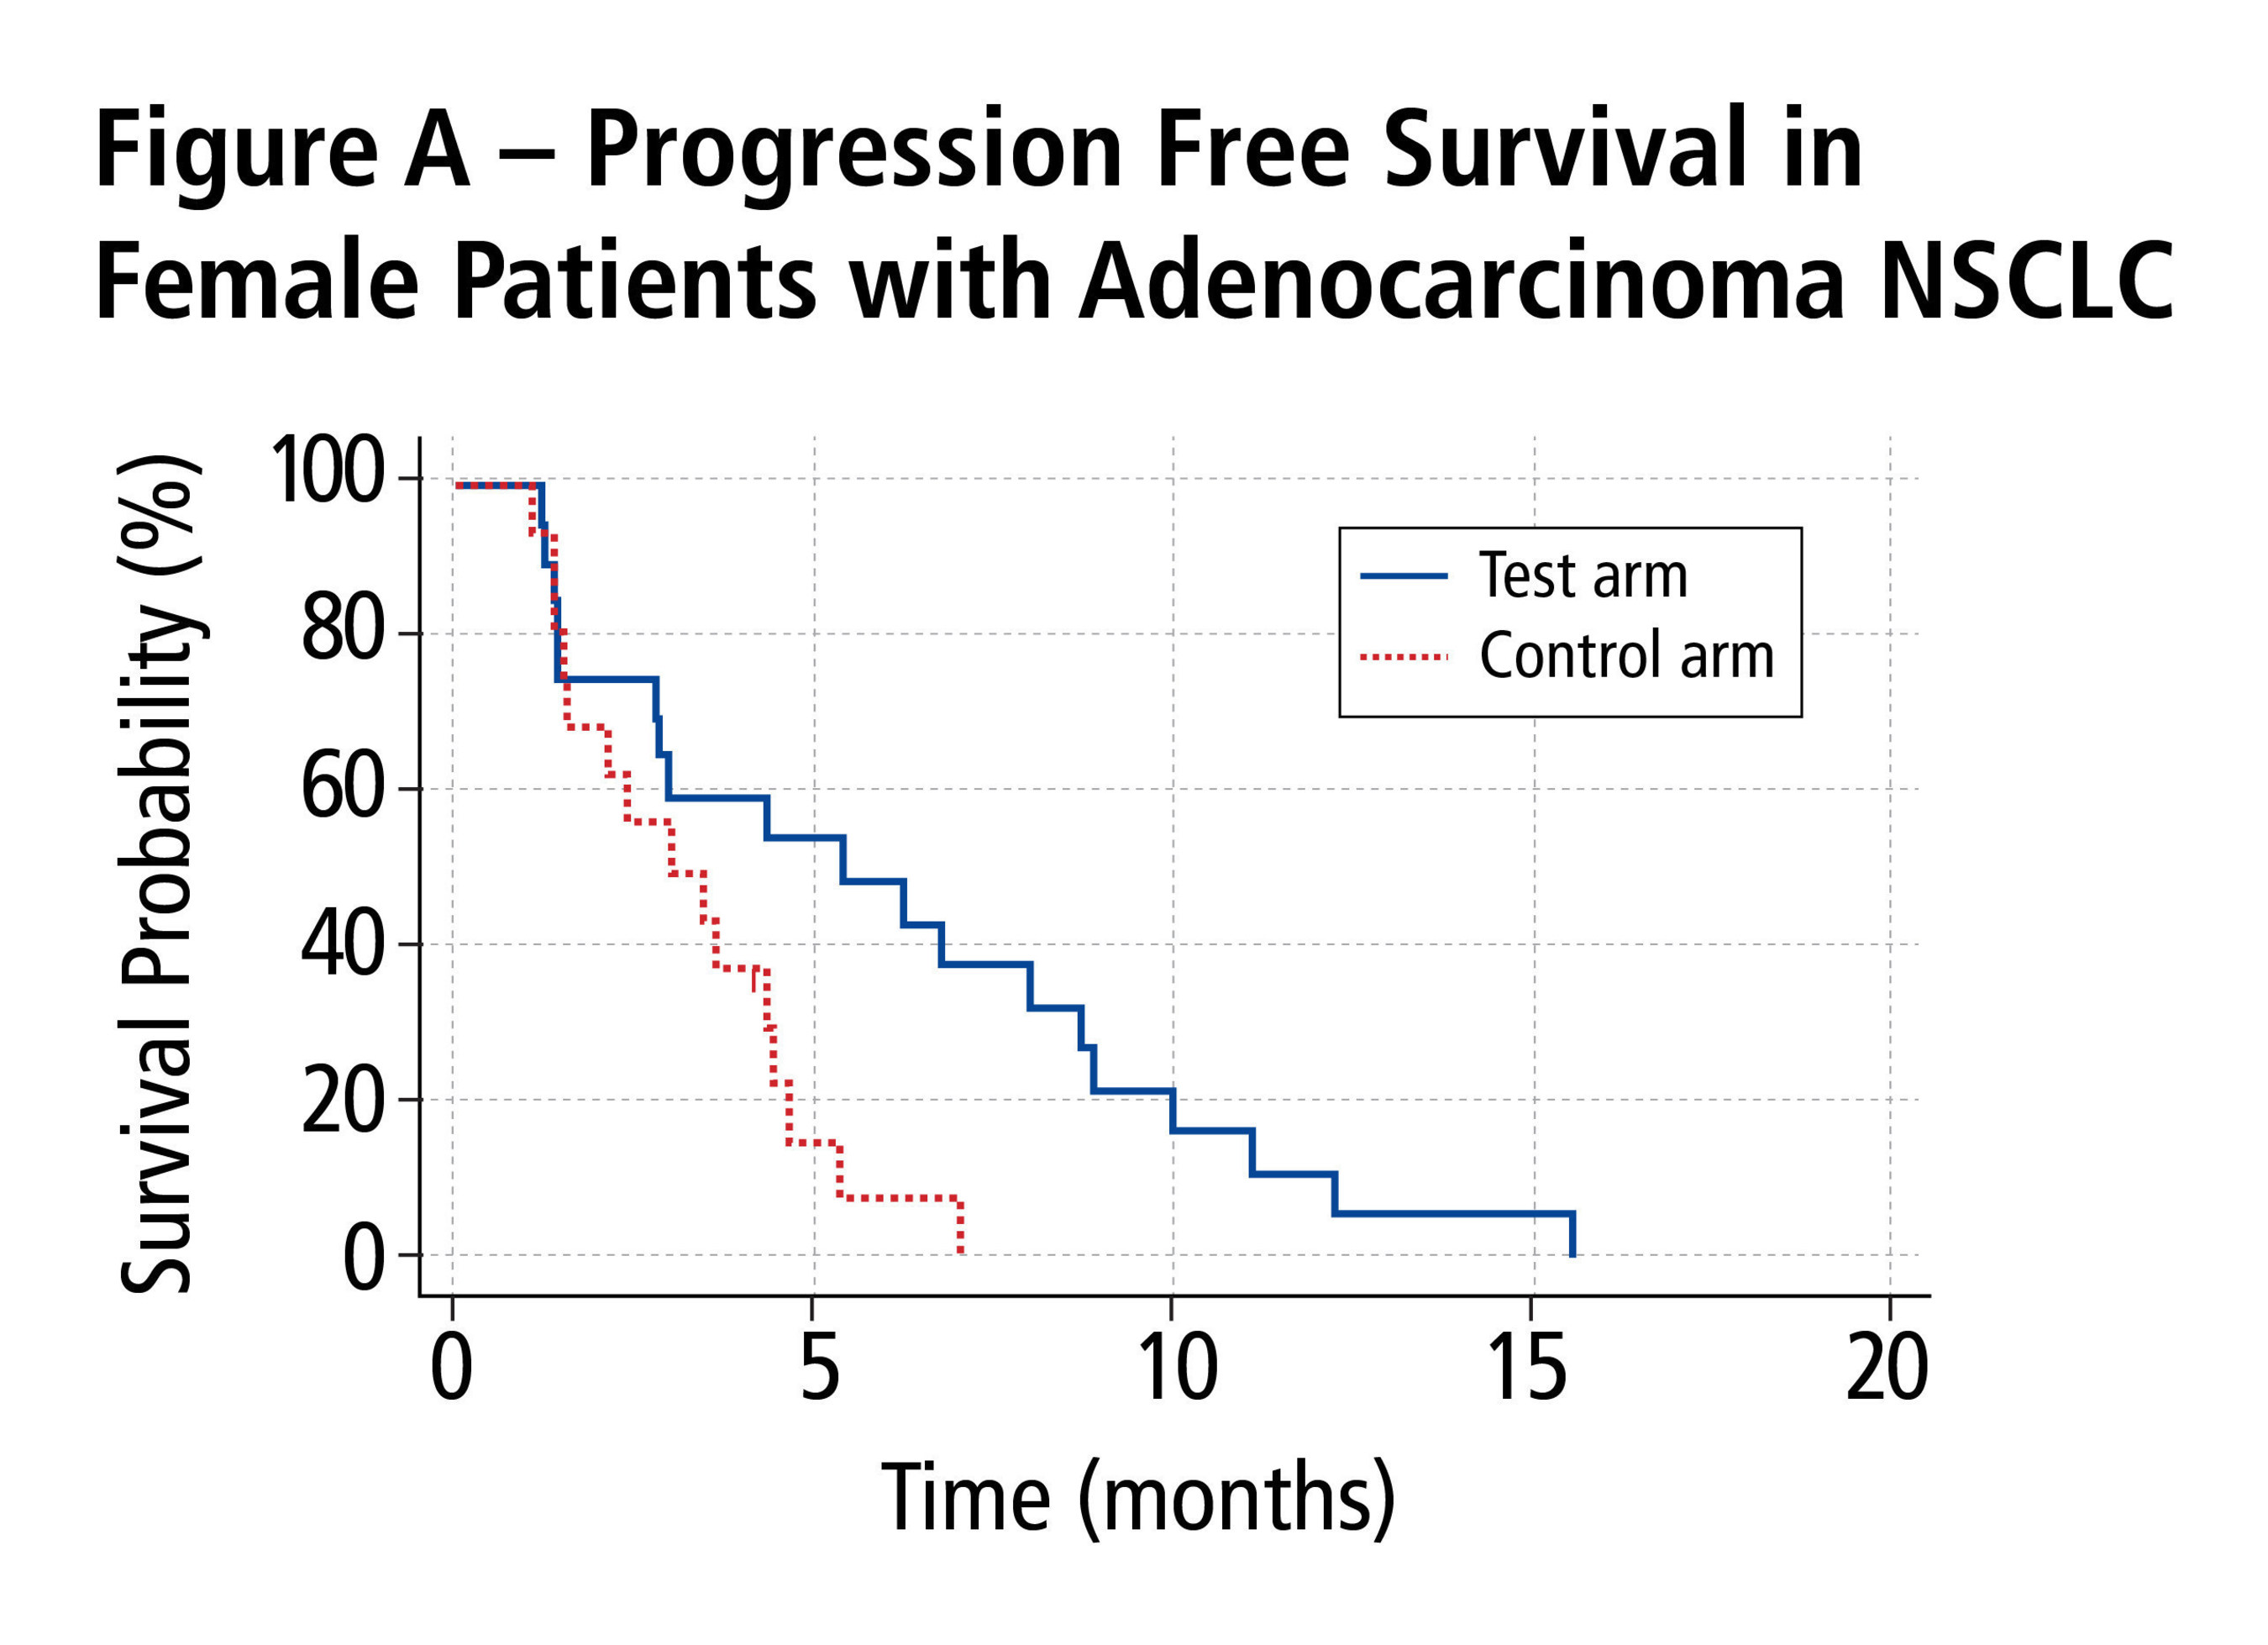 Figure A - Progression Free Survival in Female Patients with Adenocarcinoma NSCLC